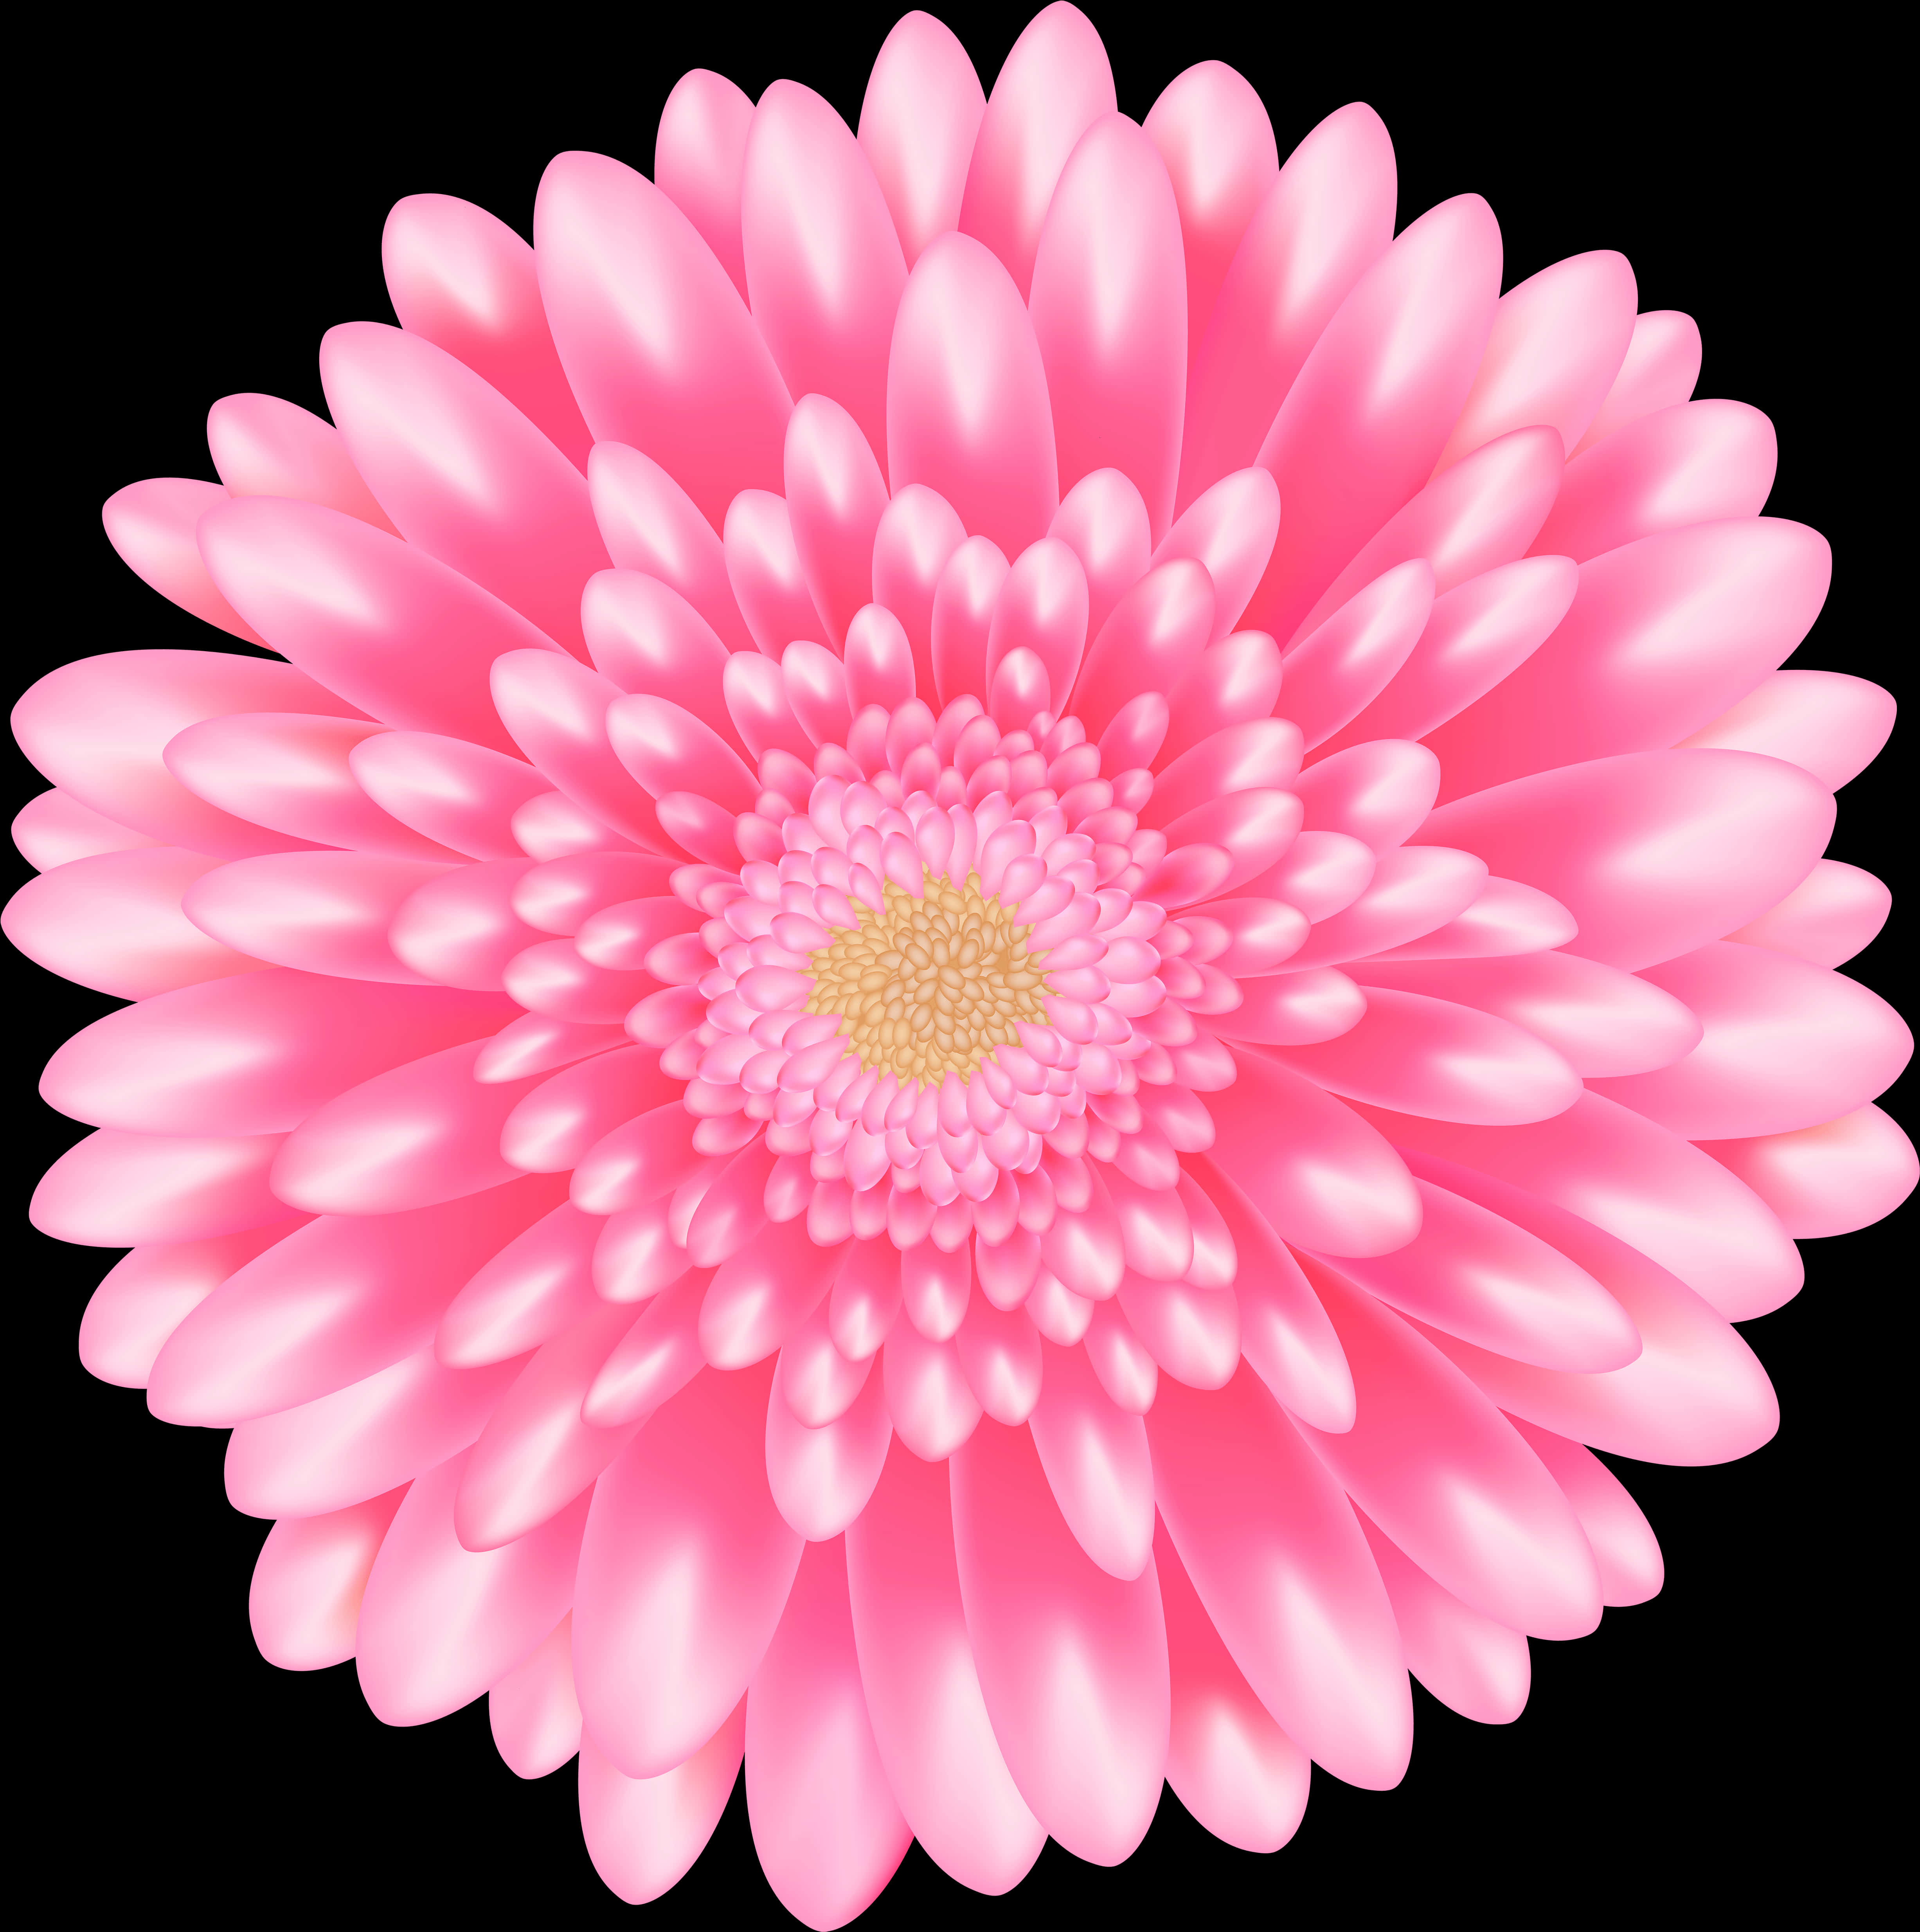 Vibrant Pink Daisy Flower PNG